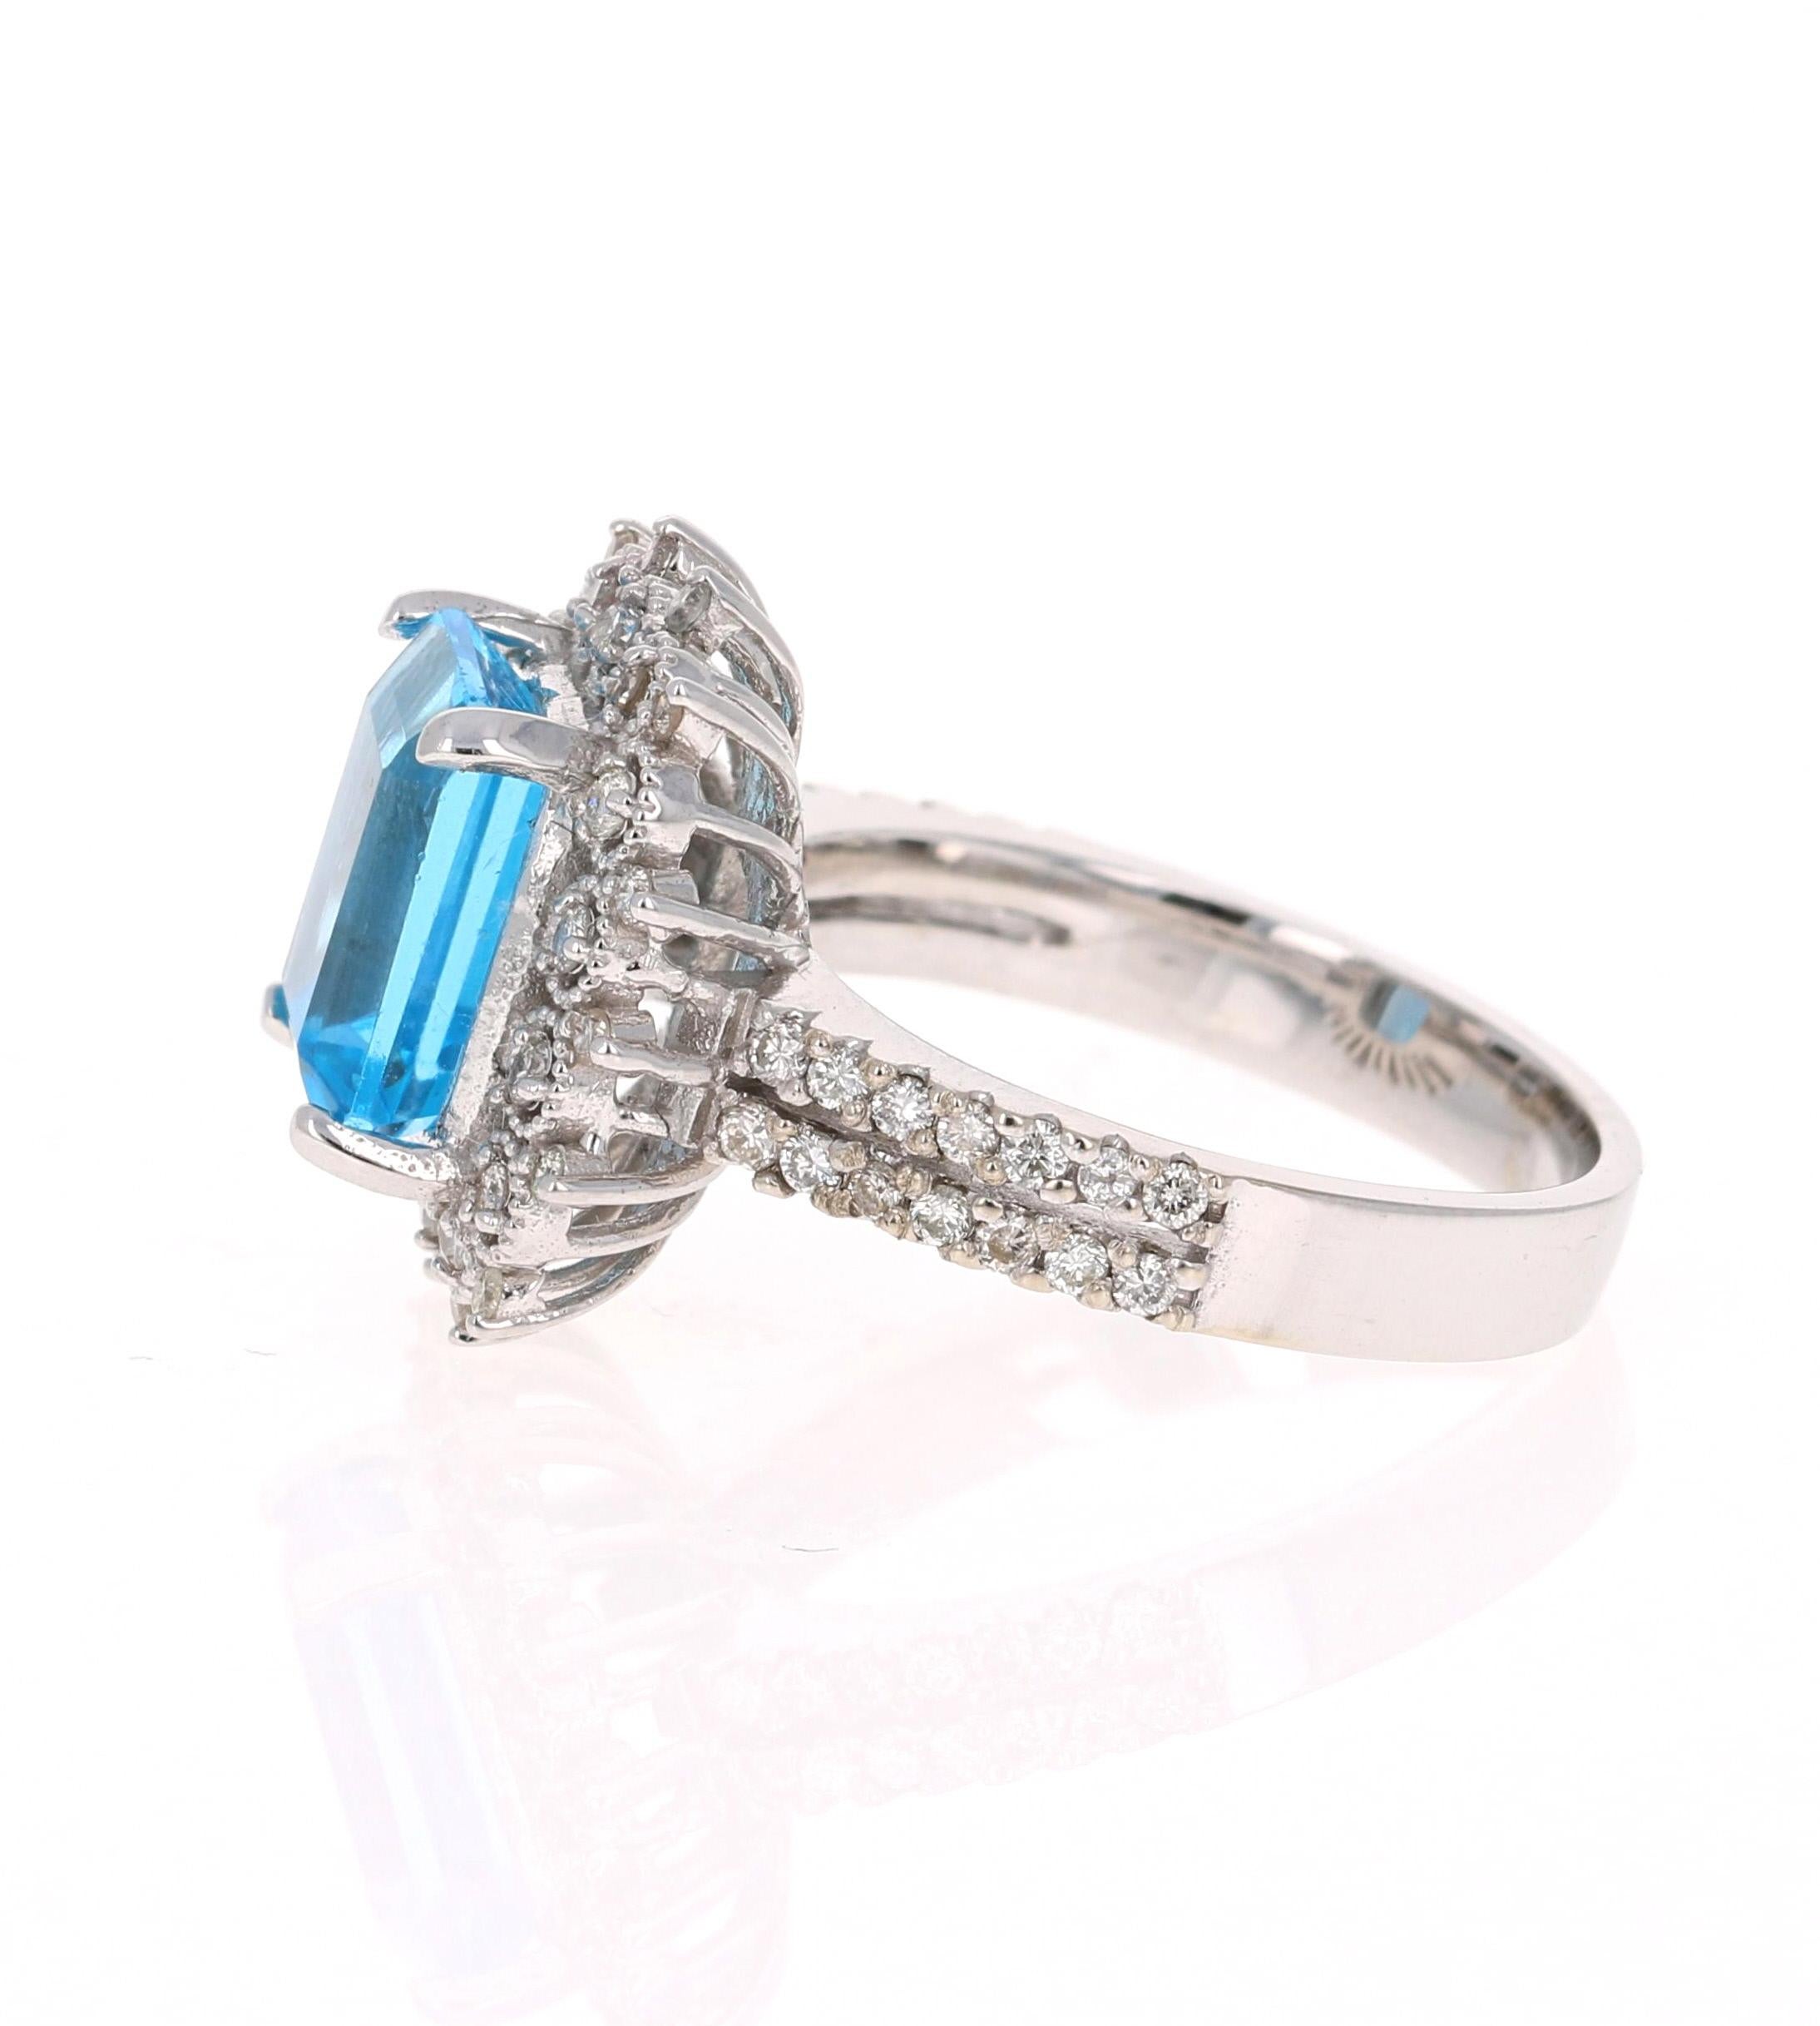 4.53 Carat Blue Topaz Diamond 14 Karat White Gold Ring In New Condition For Sale In Los Angeles, CA